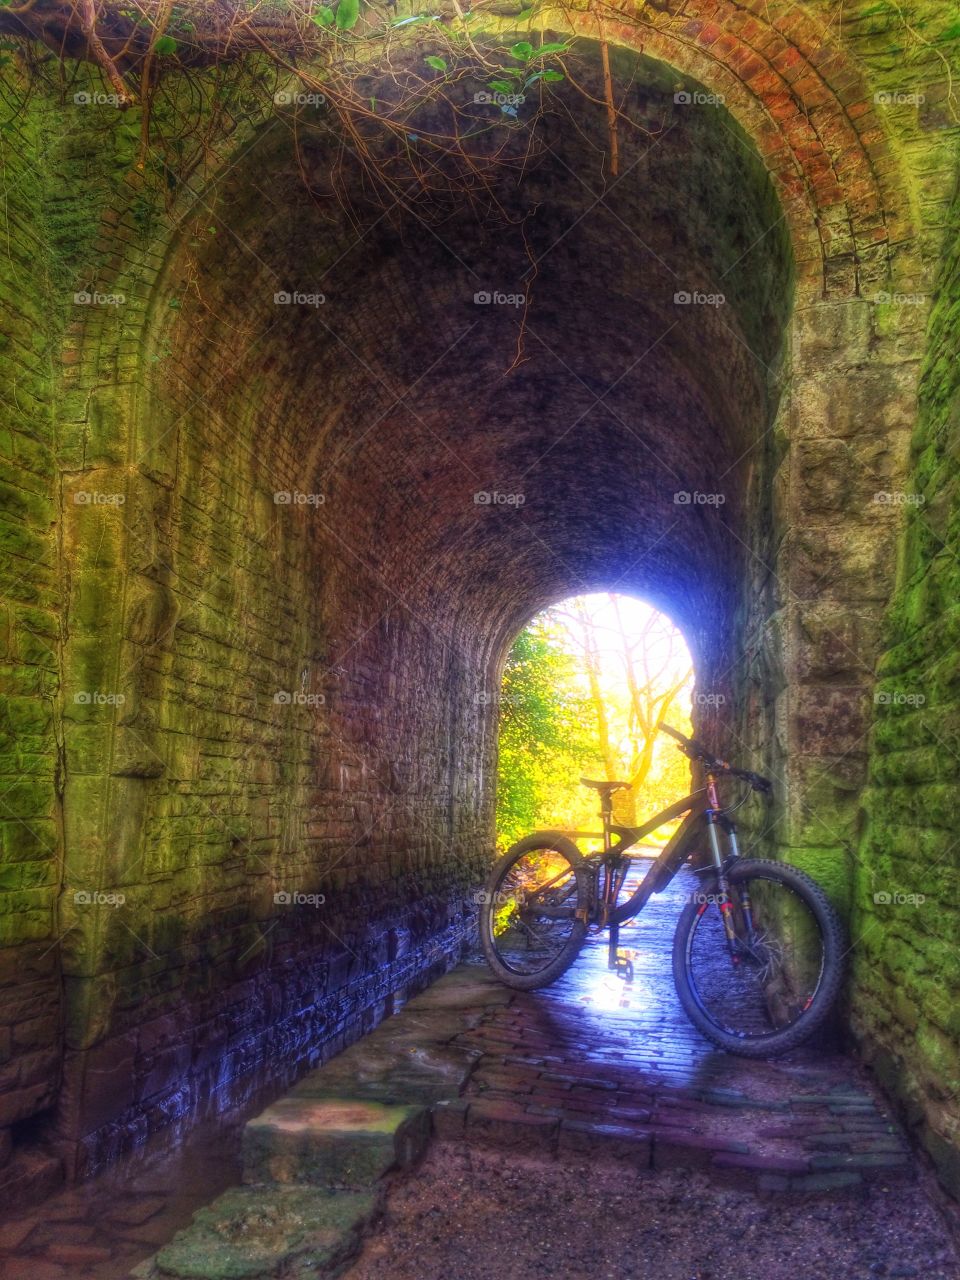 Tunnel Vision . Old Railway Bridge out Cycling